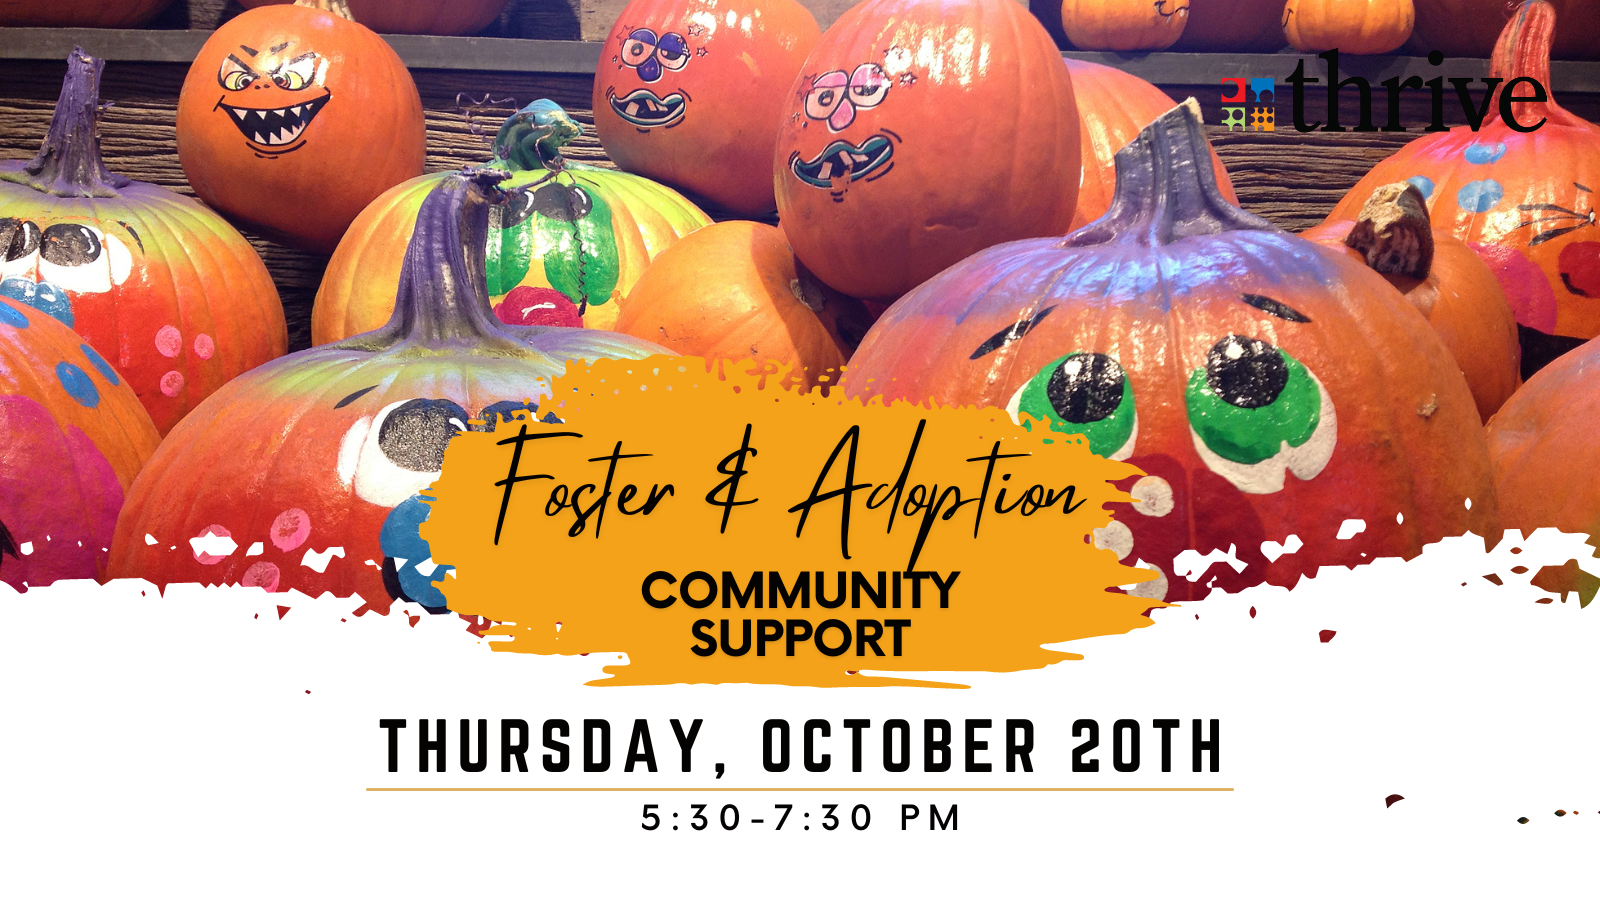 Foster & Adoption Community Support. Thursday, Oct. 20th 5:30-7:30 PM. Painted pumpkins.